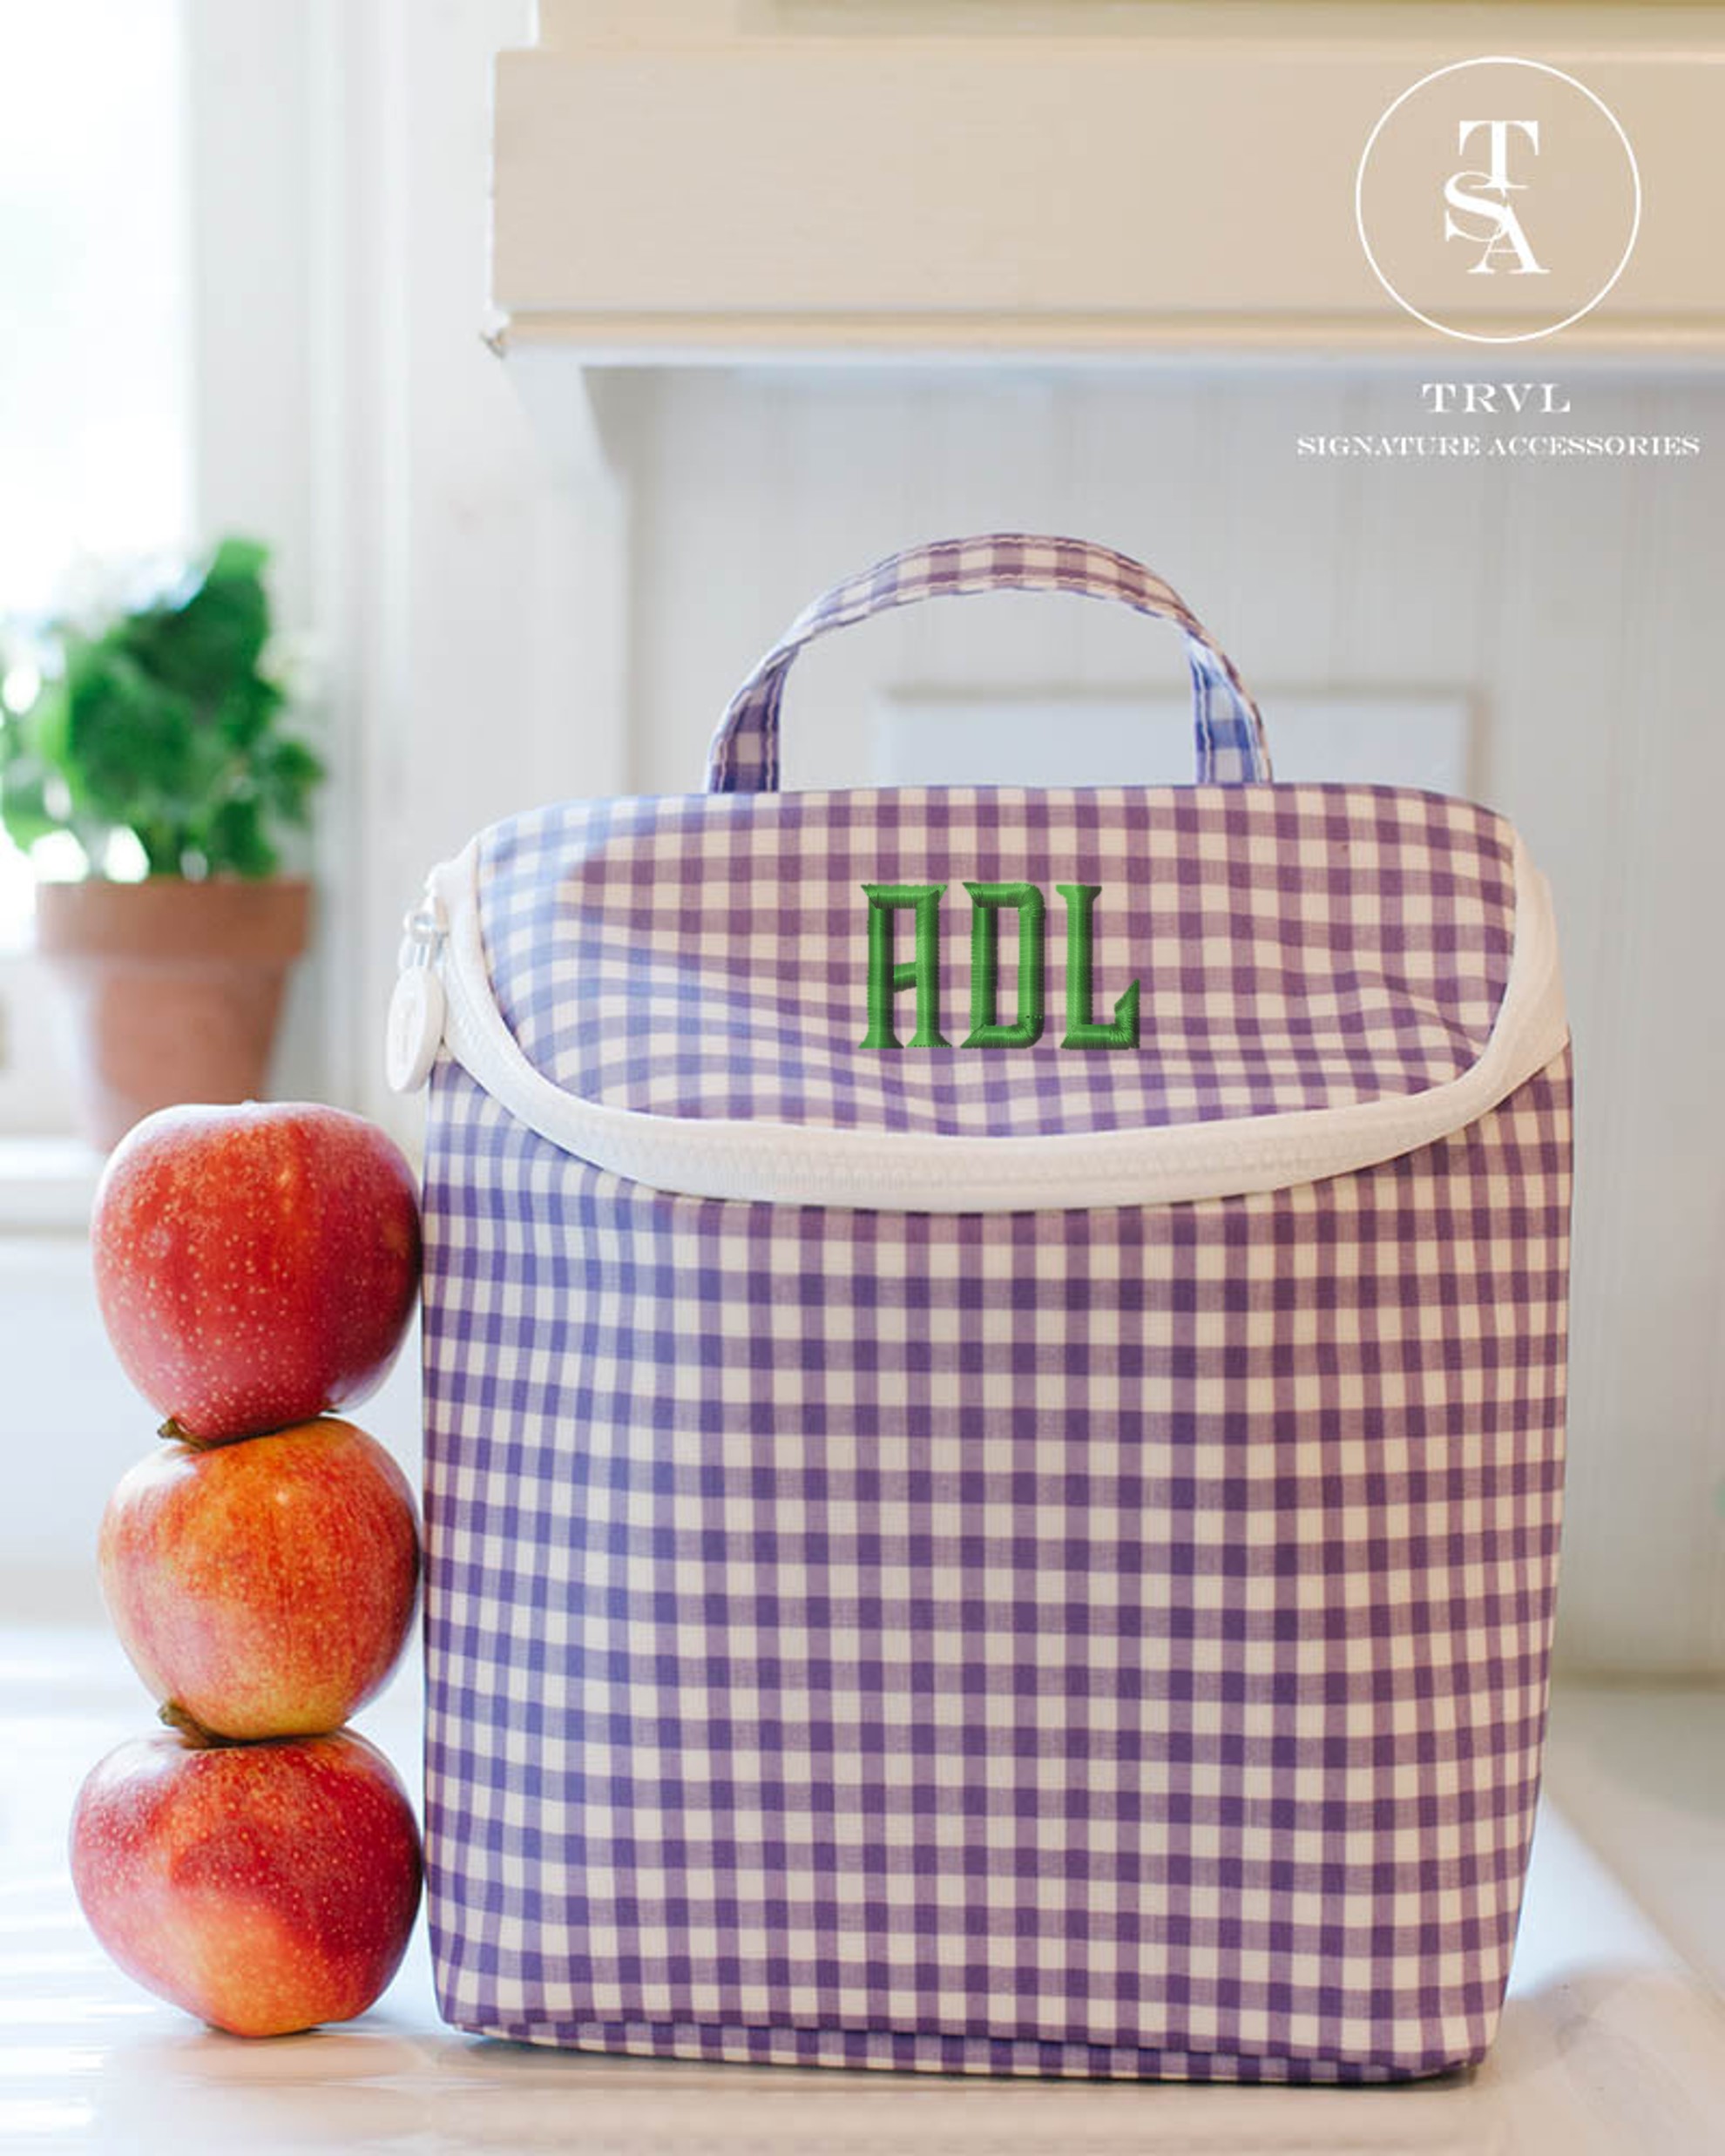  Insulated Lunch Box for Boys, Personalized Preppy